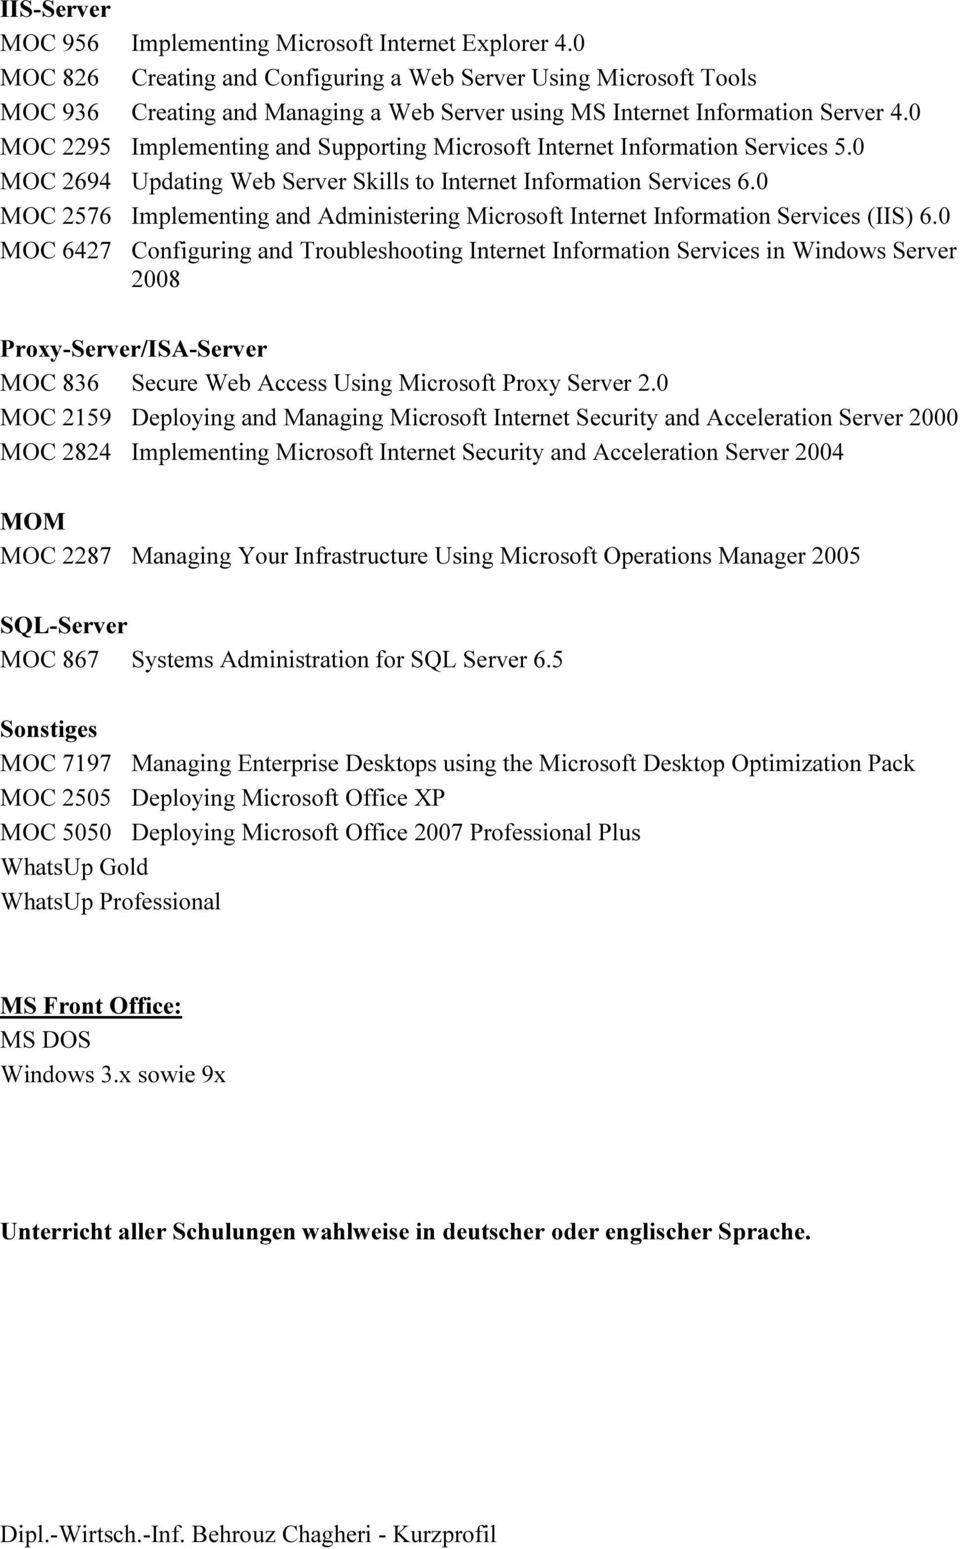 0 MOC 2295 Implementing and Supporting Microsoft Internet Information Services 5.0 MOC 2694 Updating Web Server Skills to Internet Information Services 6.